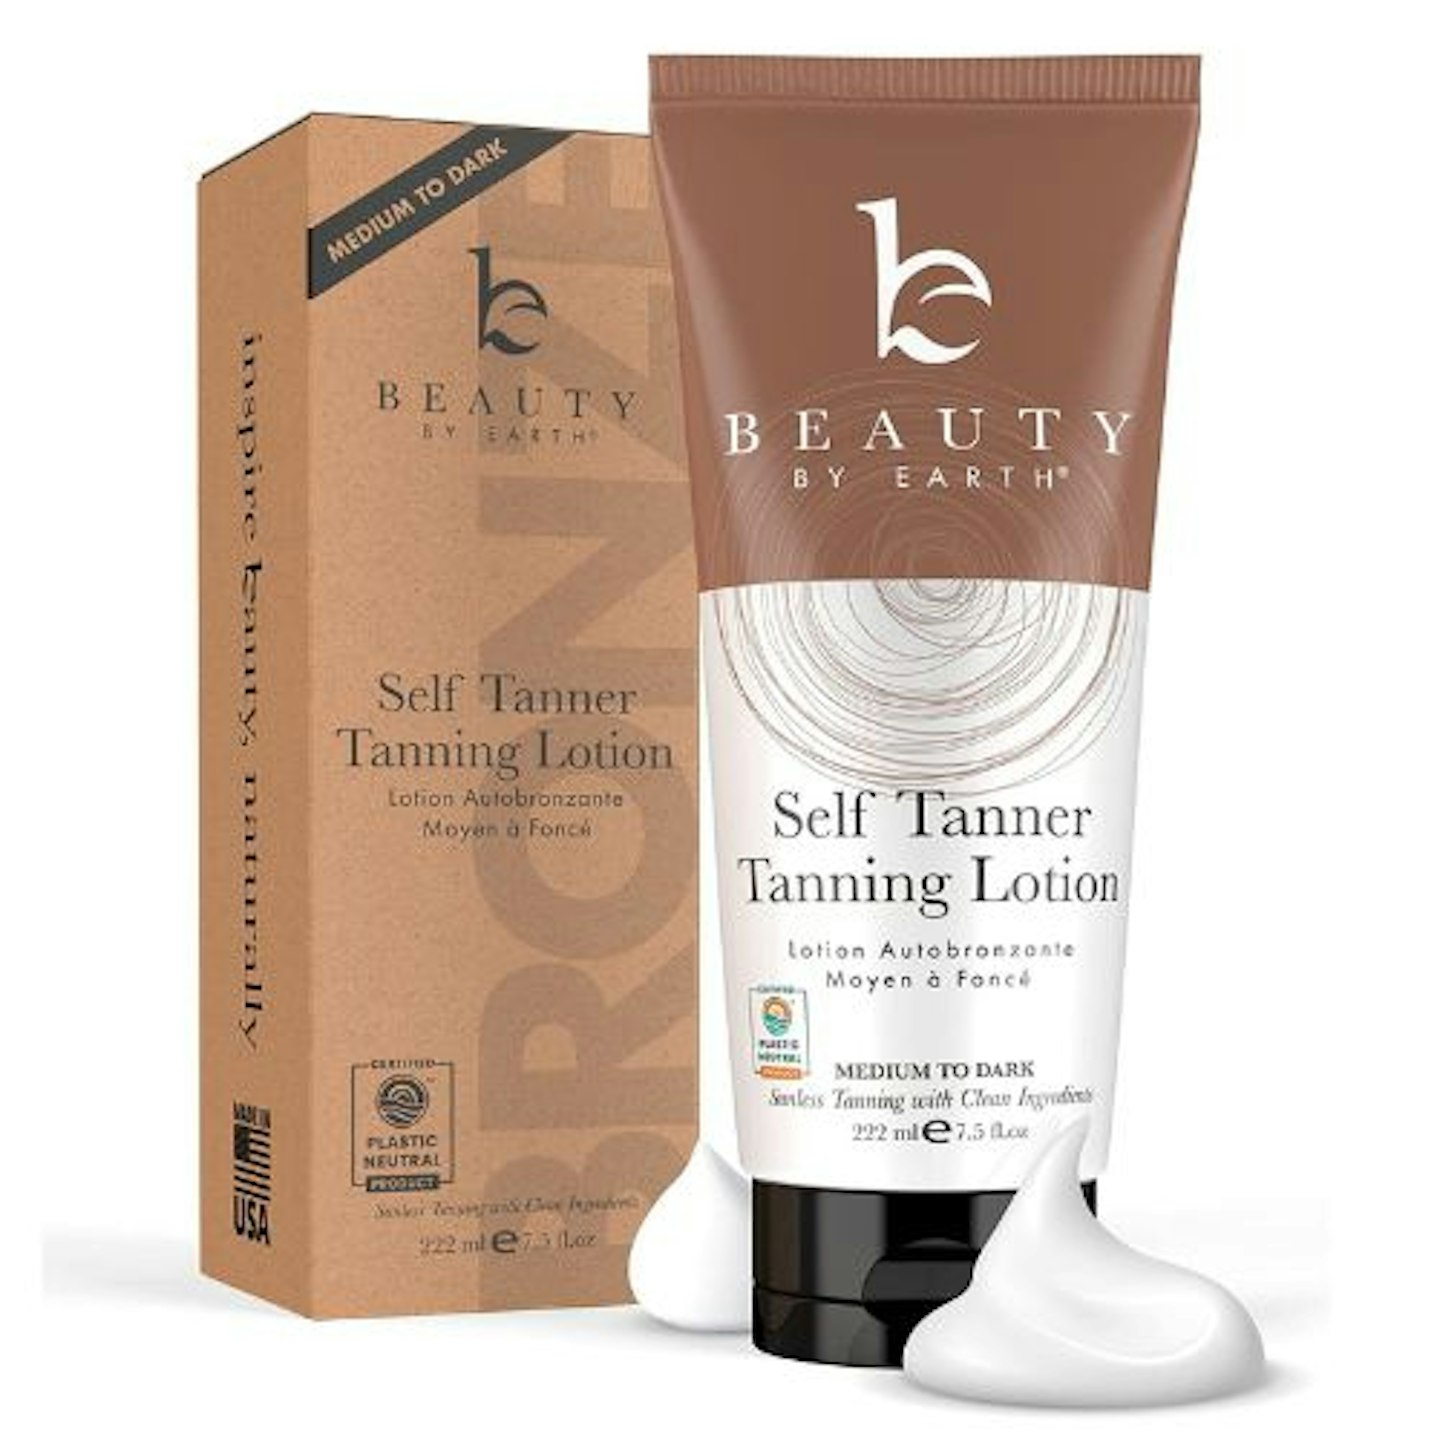 Beauty by Earth Organic & Natural Self Tanner